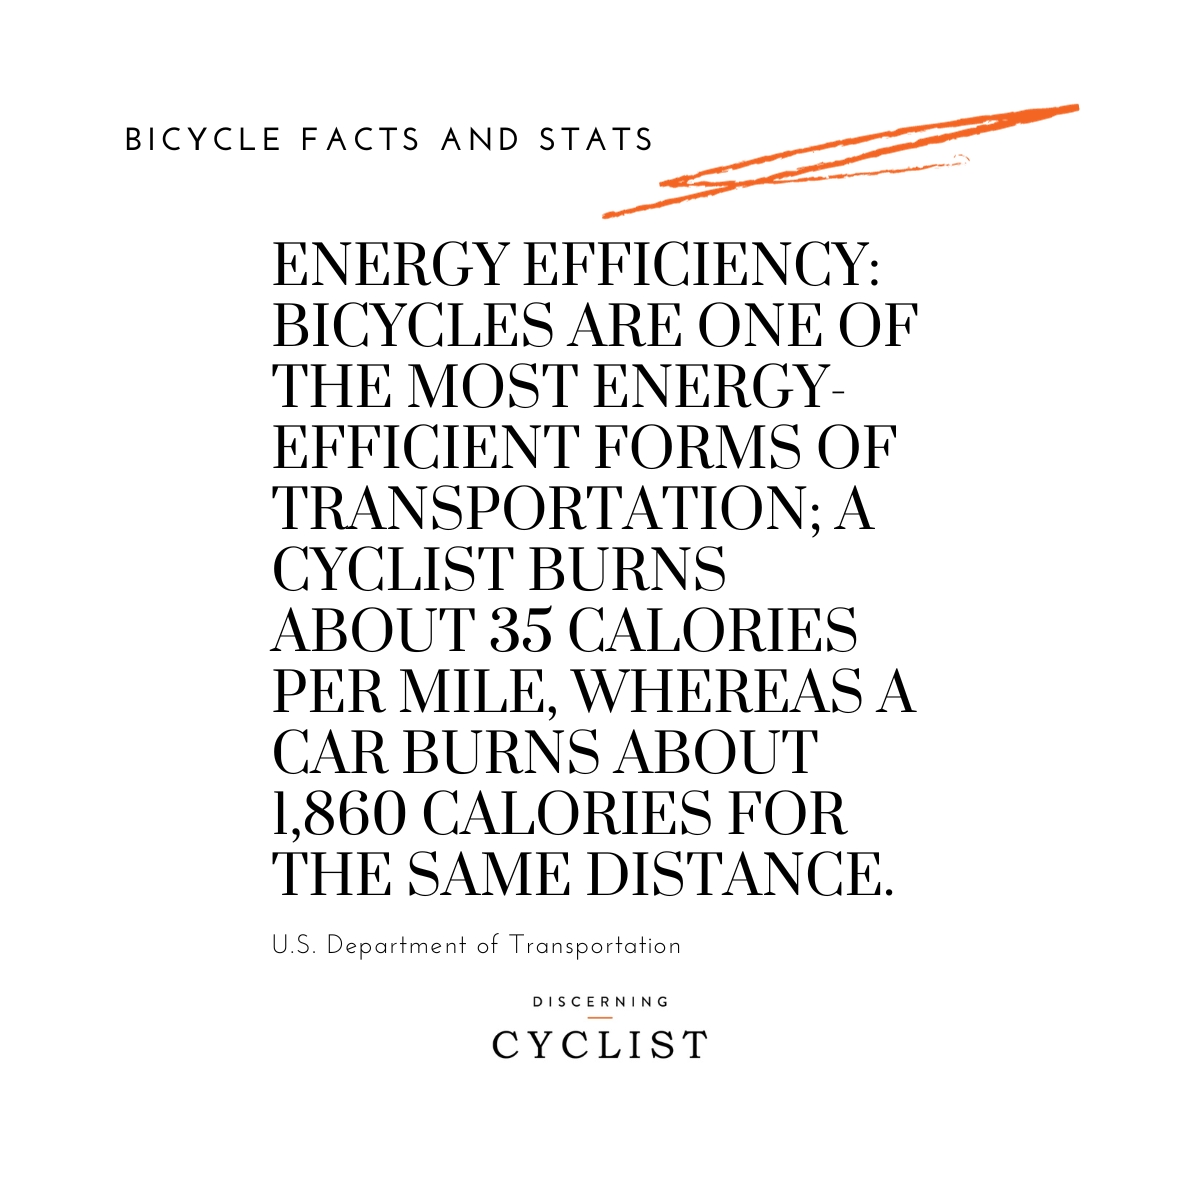 Energy Efficiency: Bicycles are one of the most energy-efficient forms of transportation; a cyclist burns about 35 calories per mile, whereas a car burns about 1,860 calories for the same distance.